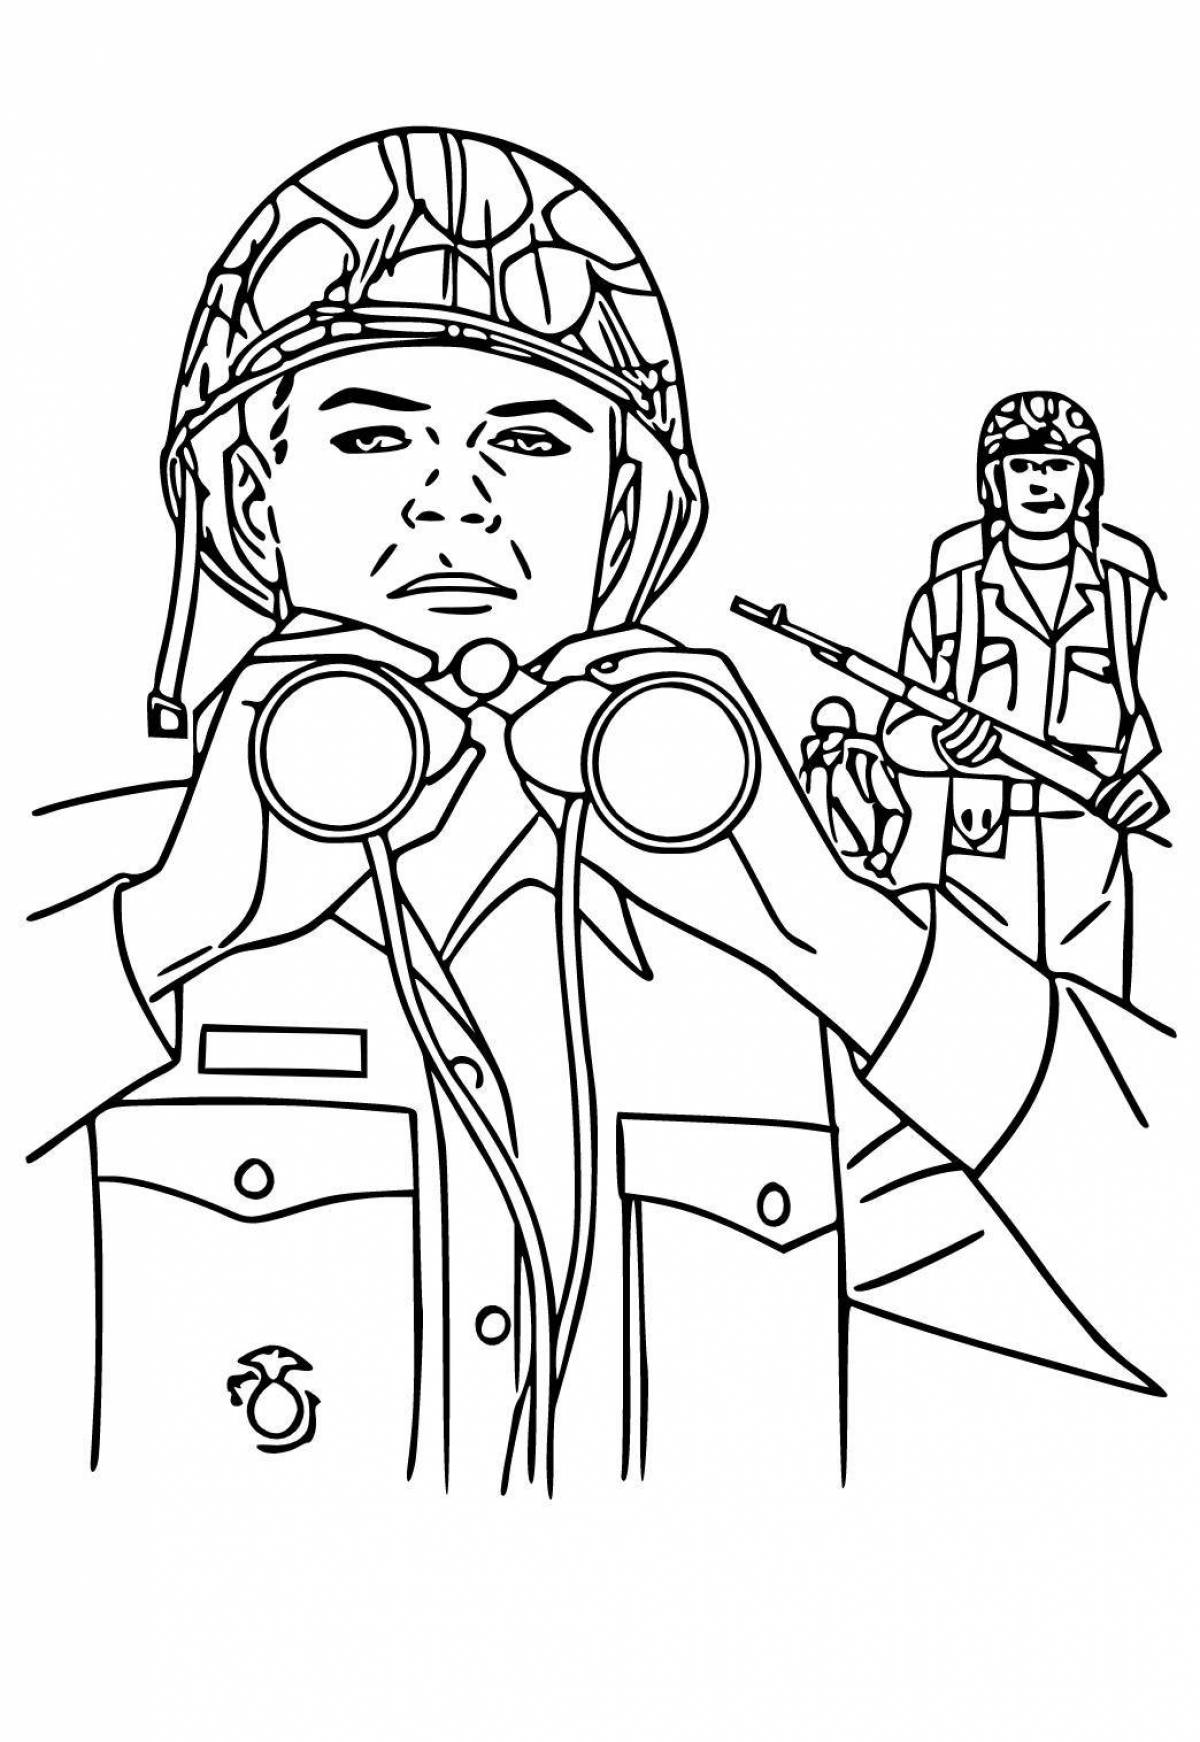 Attractive modern soldier coloring pages for kids